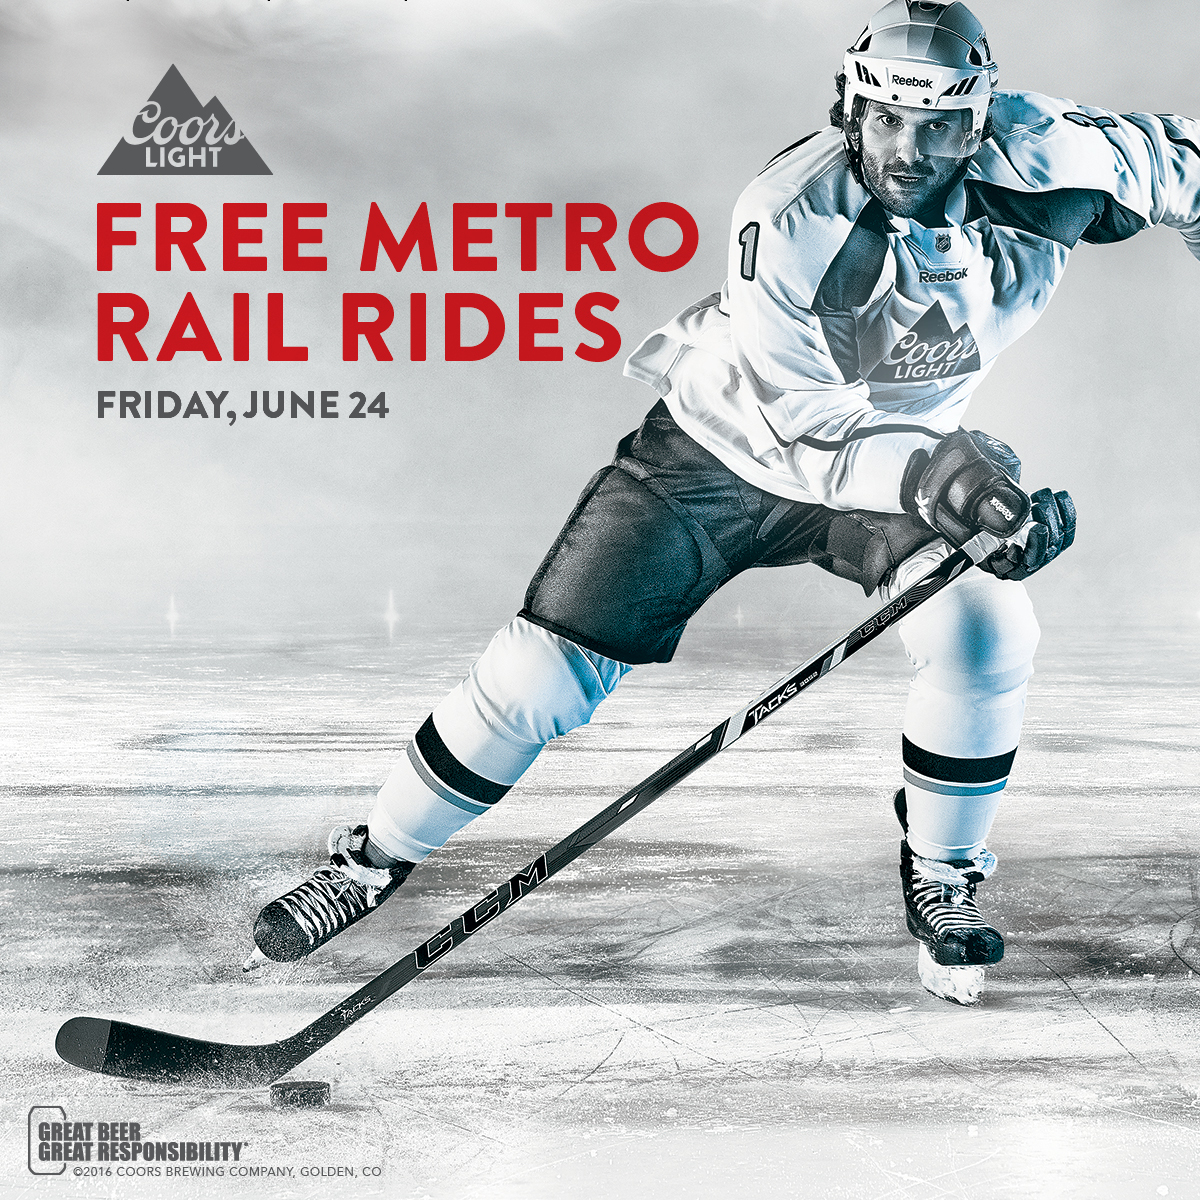 Coors Light Free Rides to help hockey fans enjoy the NHL Draft responsibly